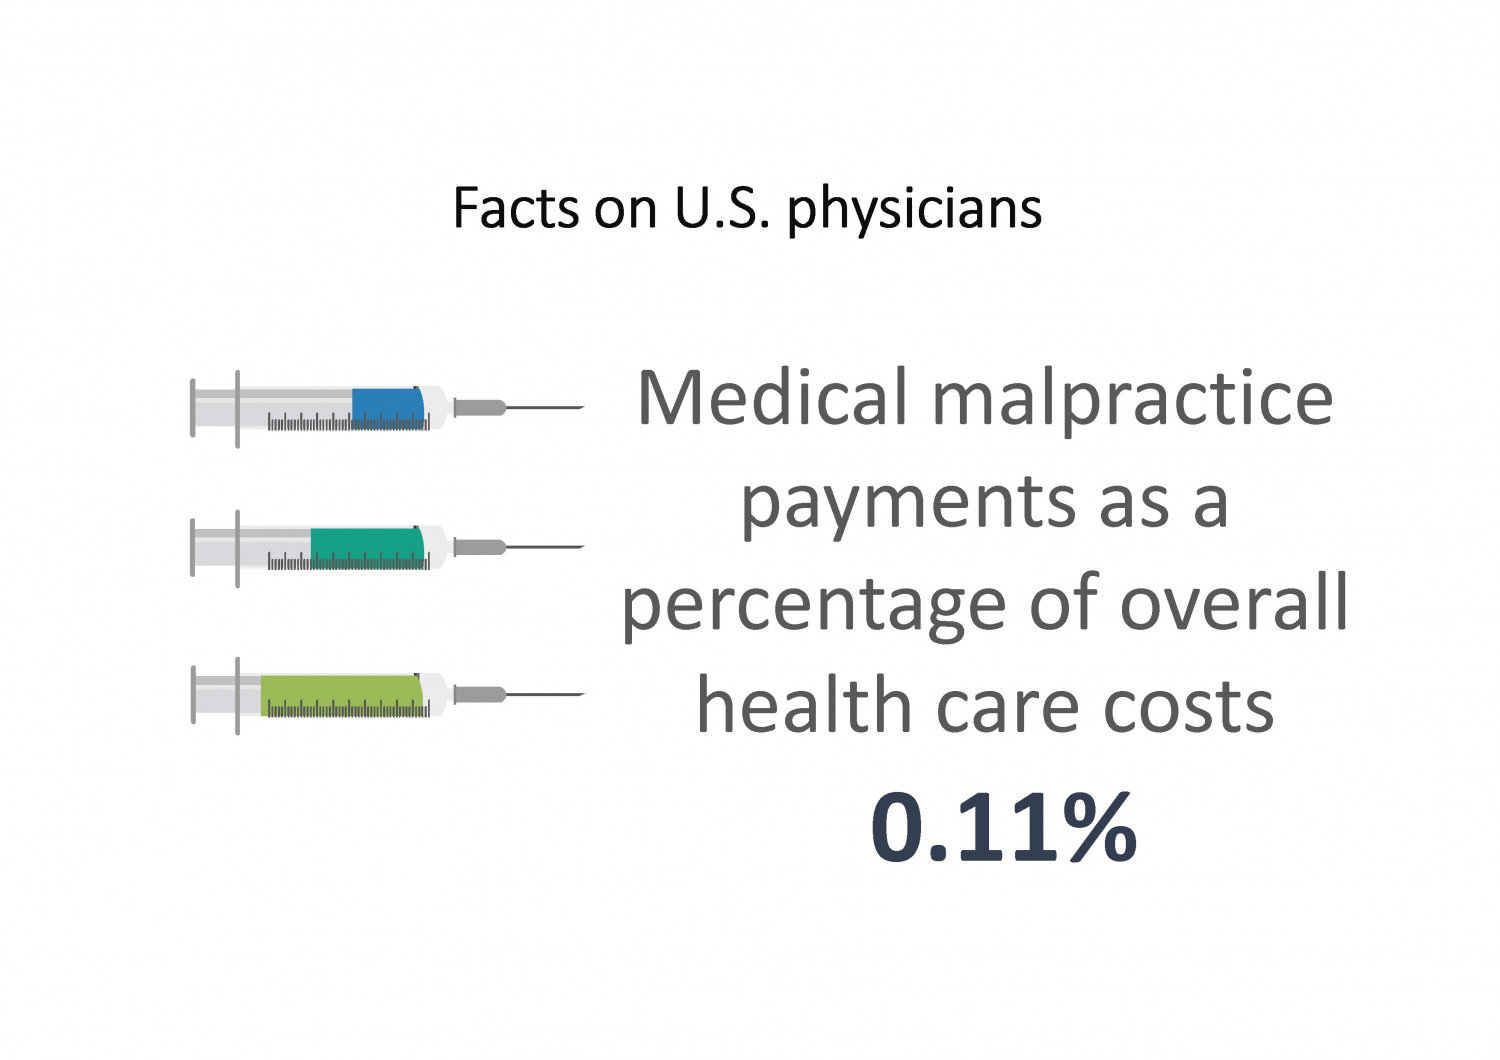 Facts on U.S. physicians Medical malpractice payments as a percentage of overall health care costs 0.11% Infographic